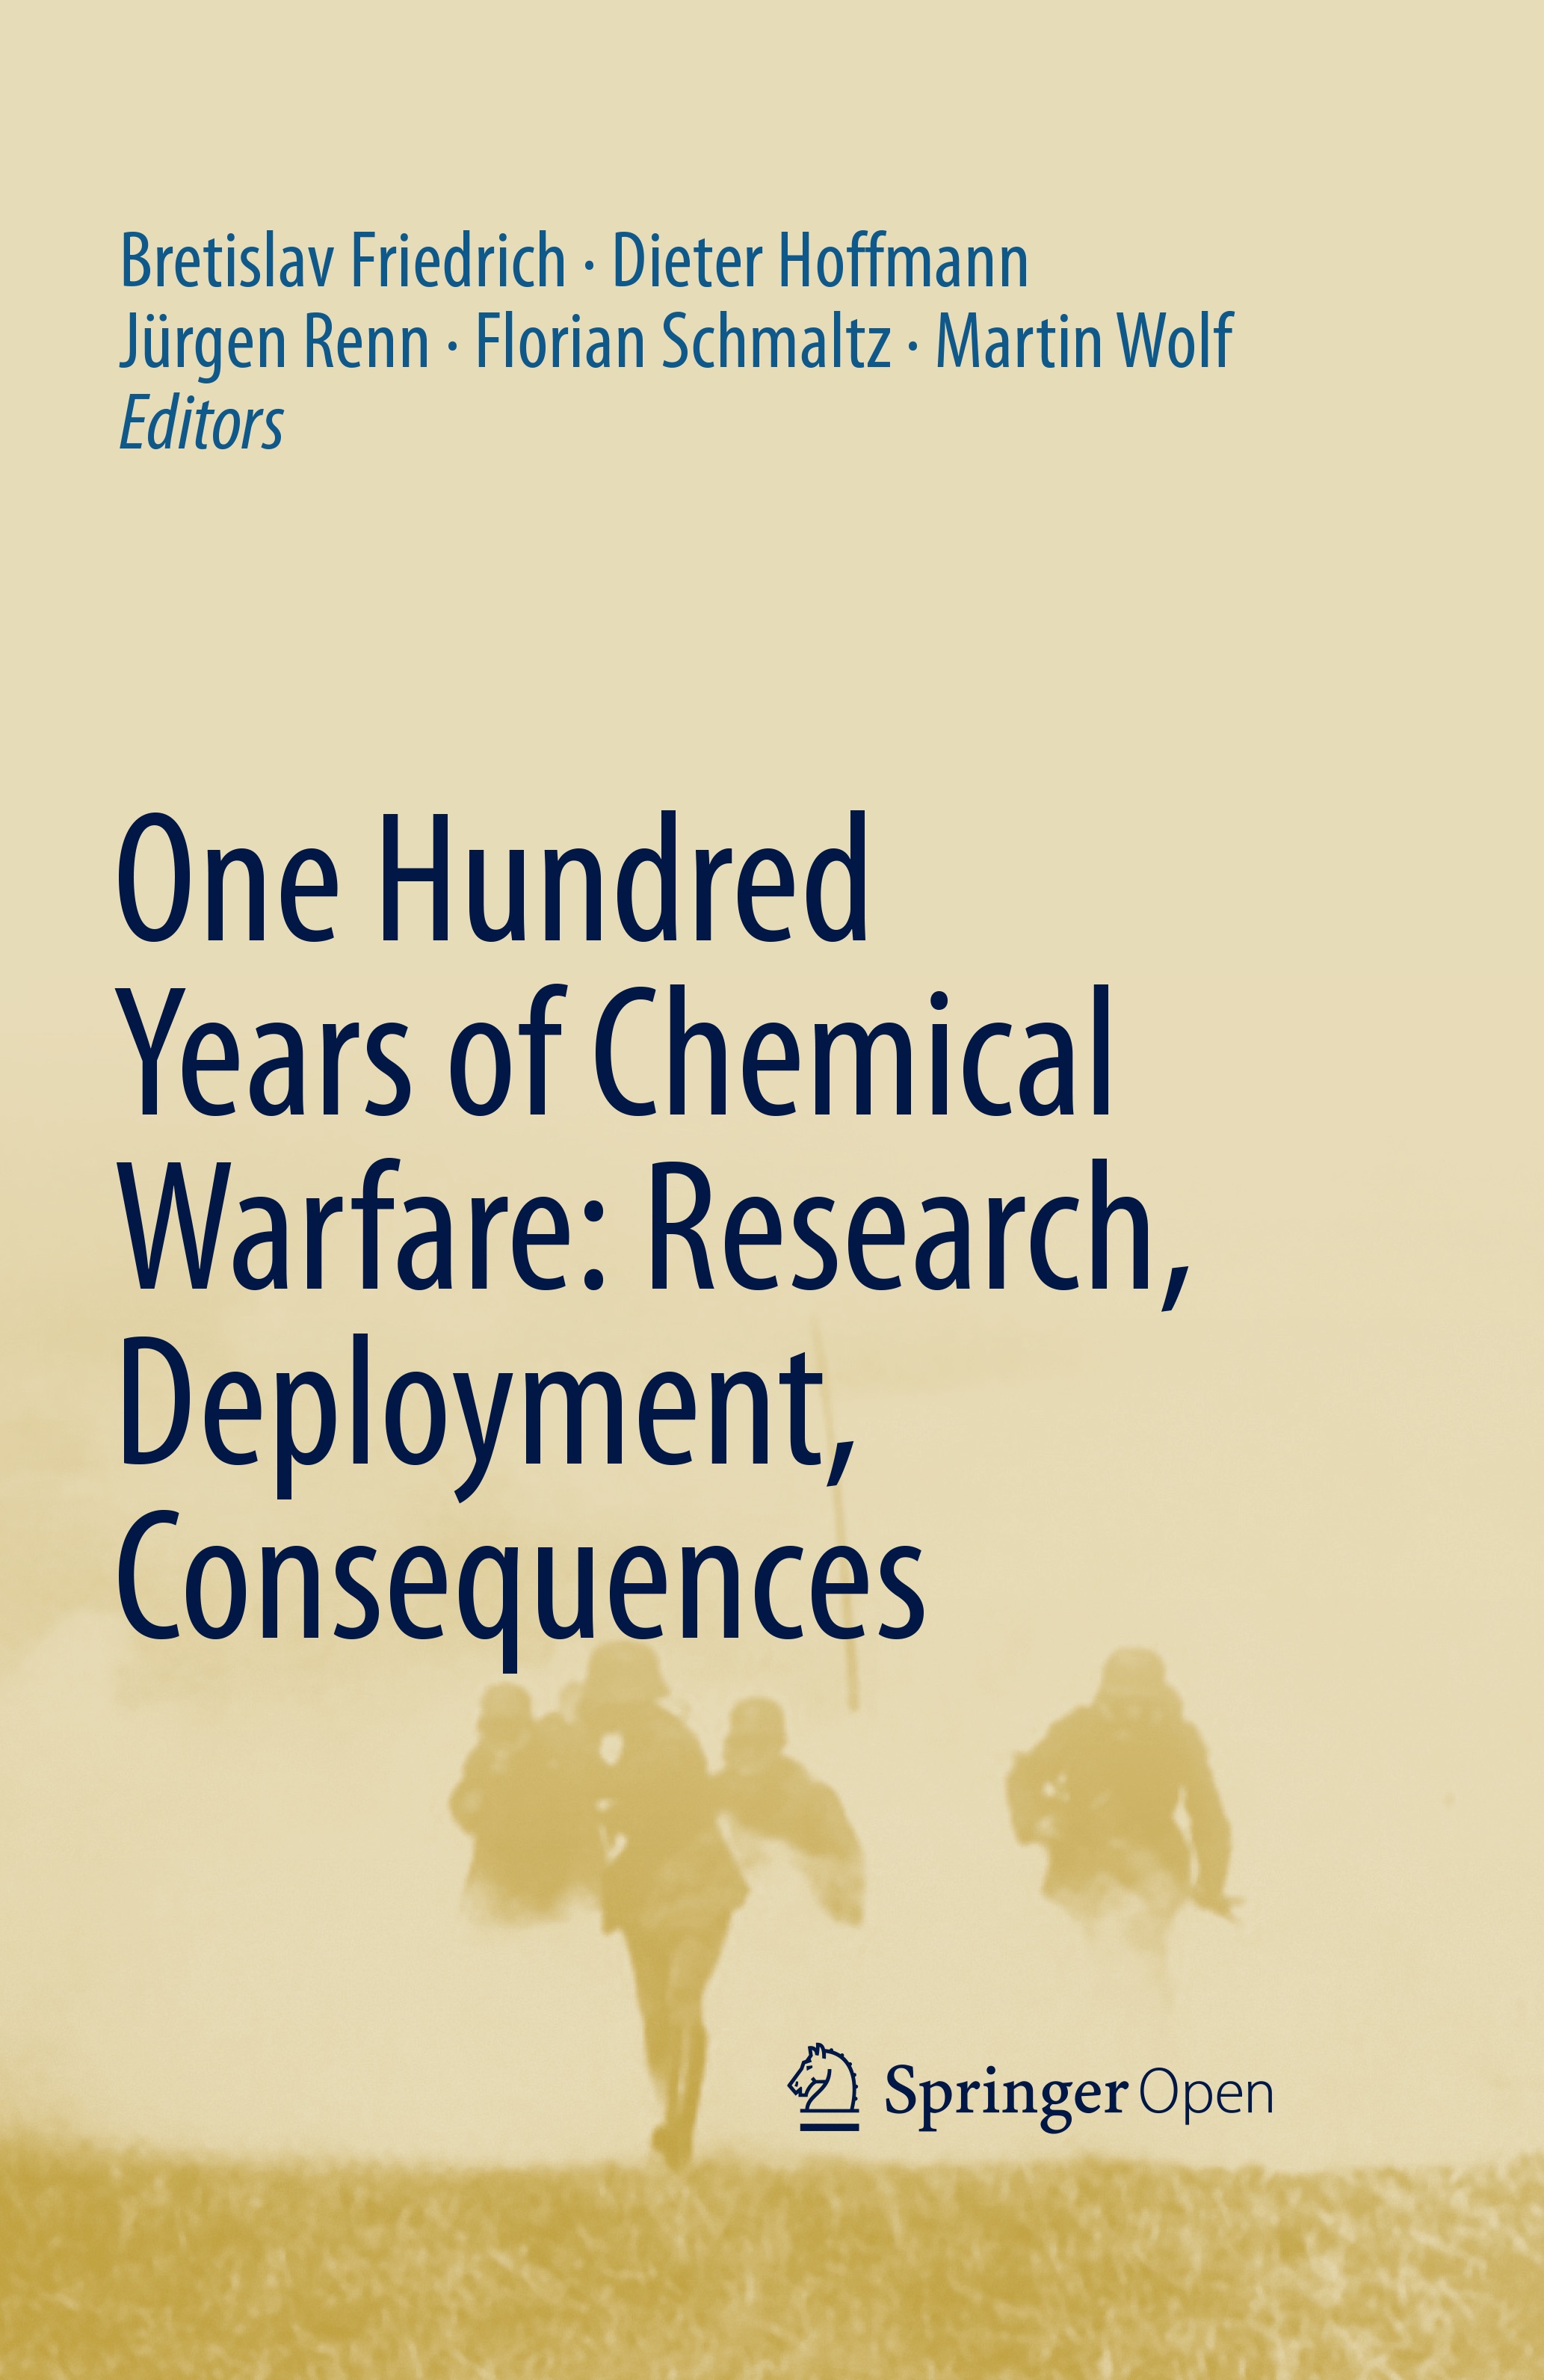 book cover: Dieter Hoffmann et al: One Hundred Years of Chemical Warfare: Research , Development, Consequences (2017)